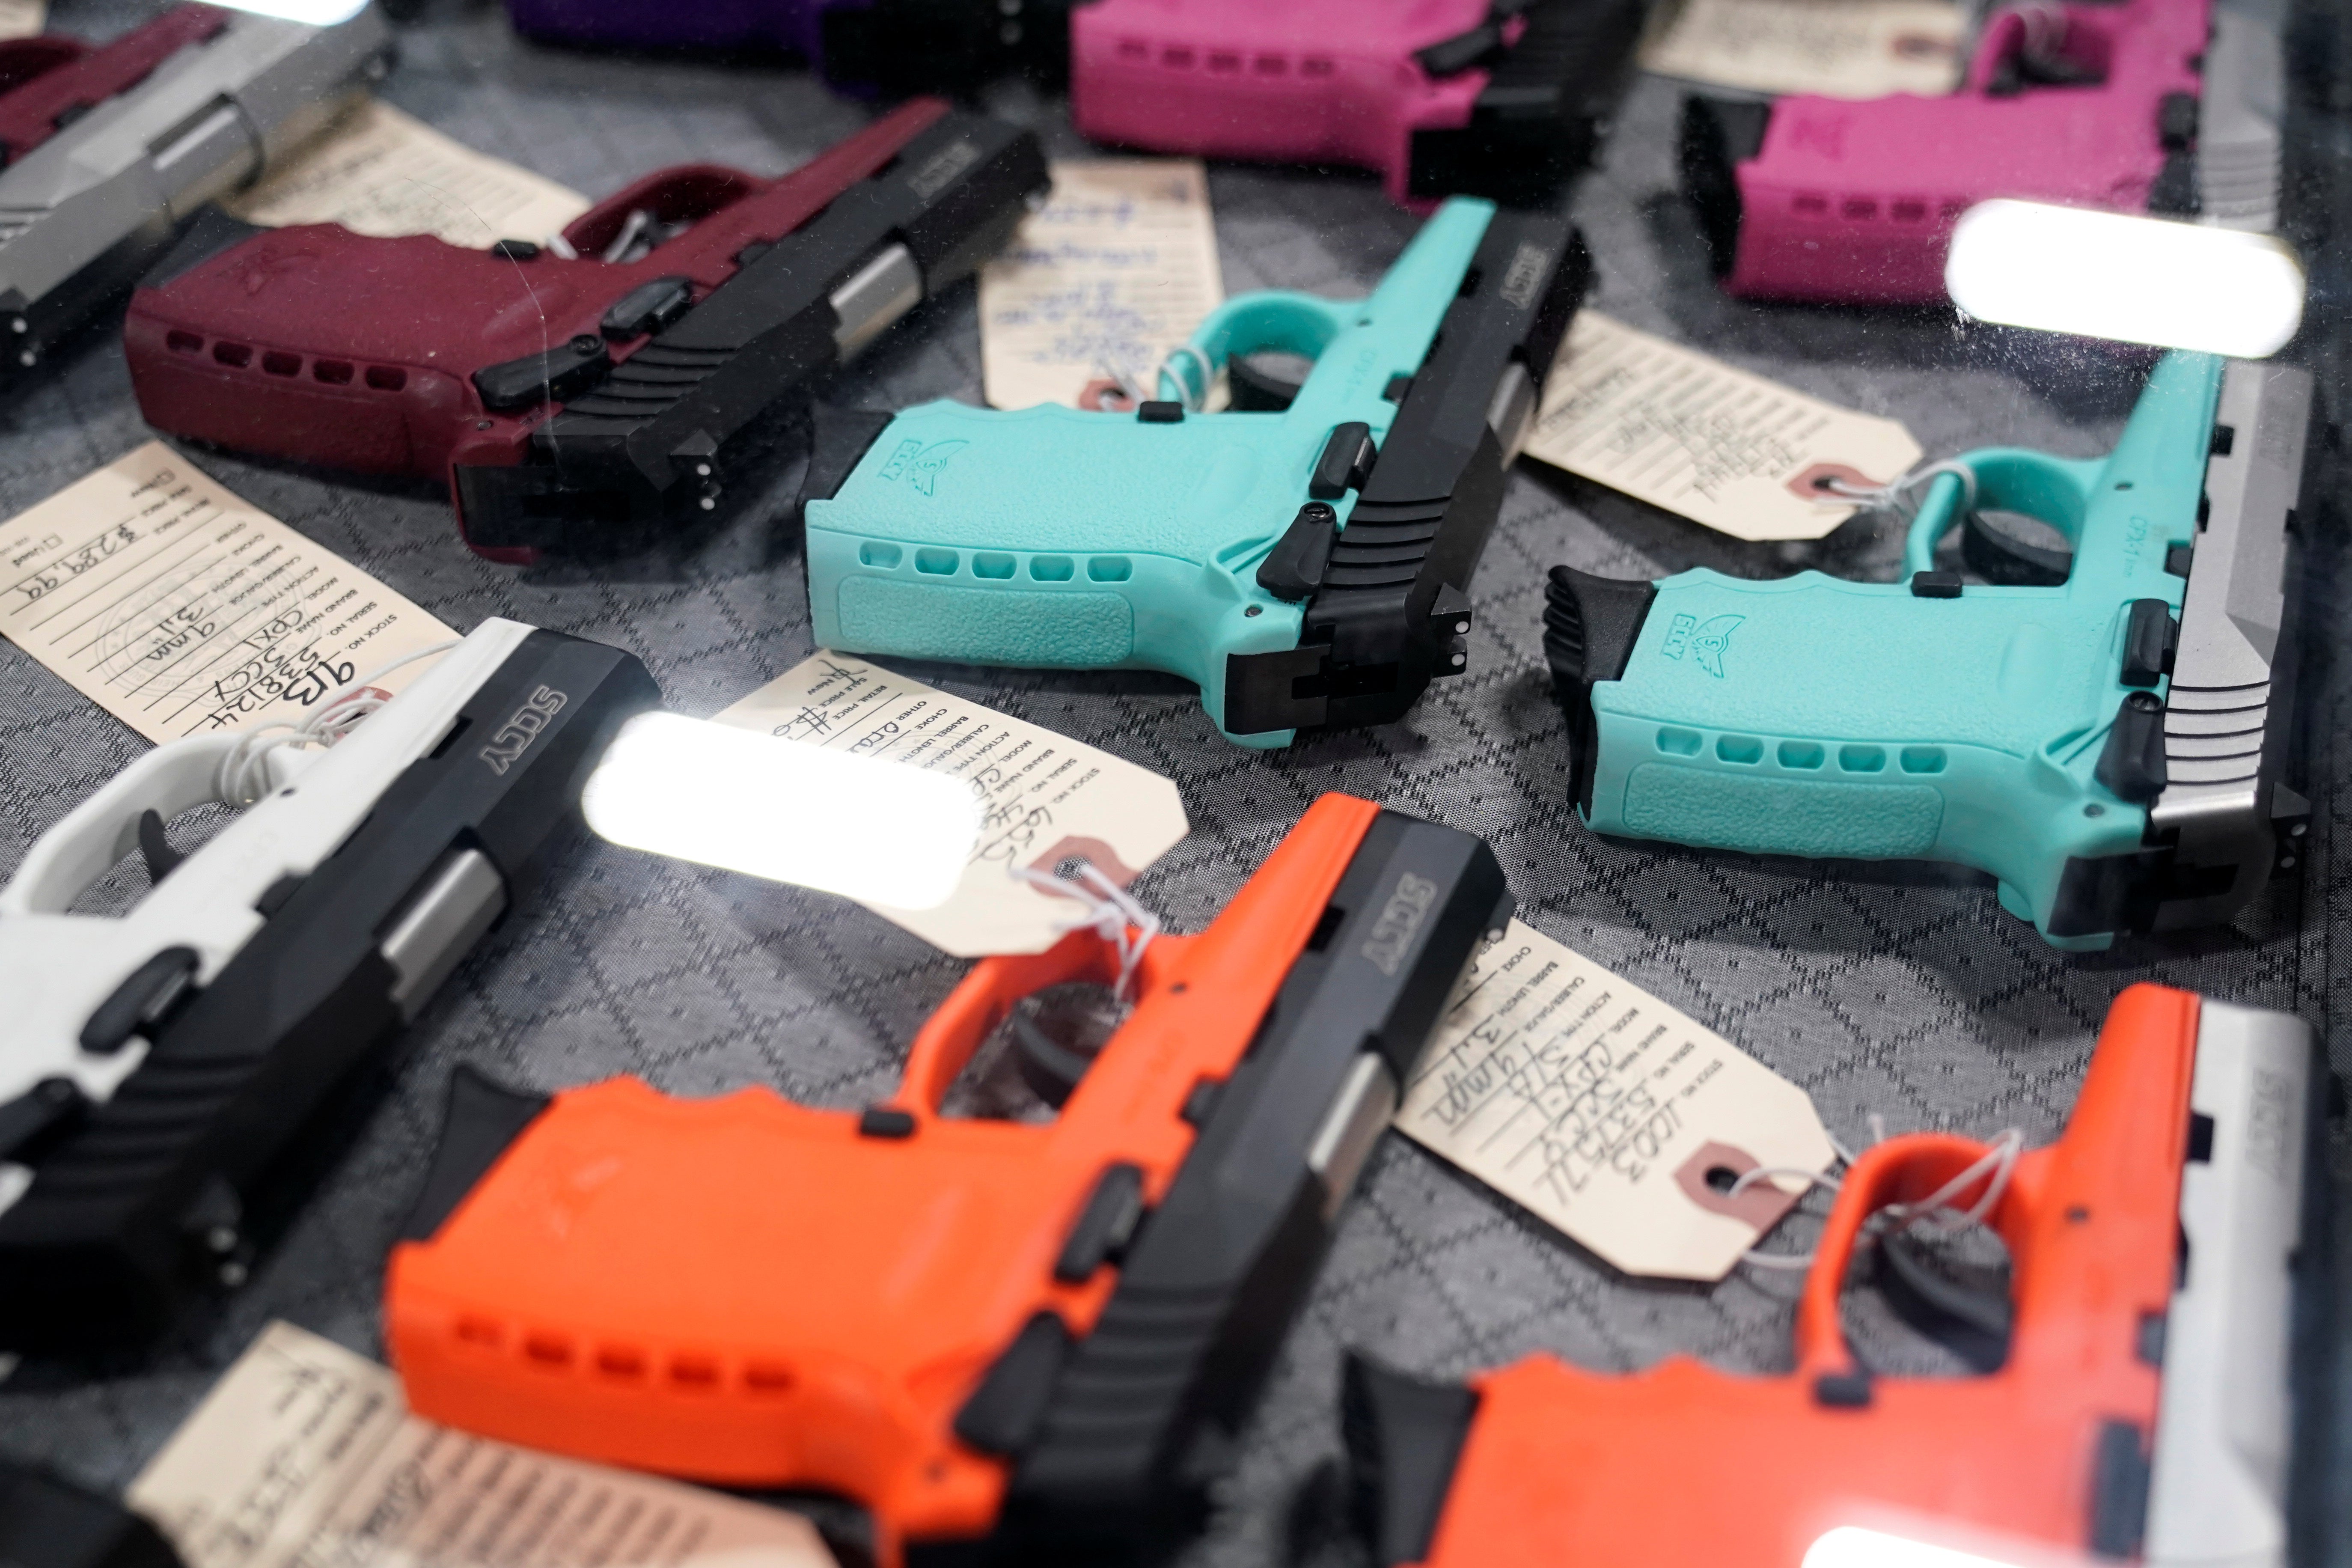 Pistols with colored grips arrayed on a table